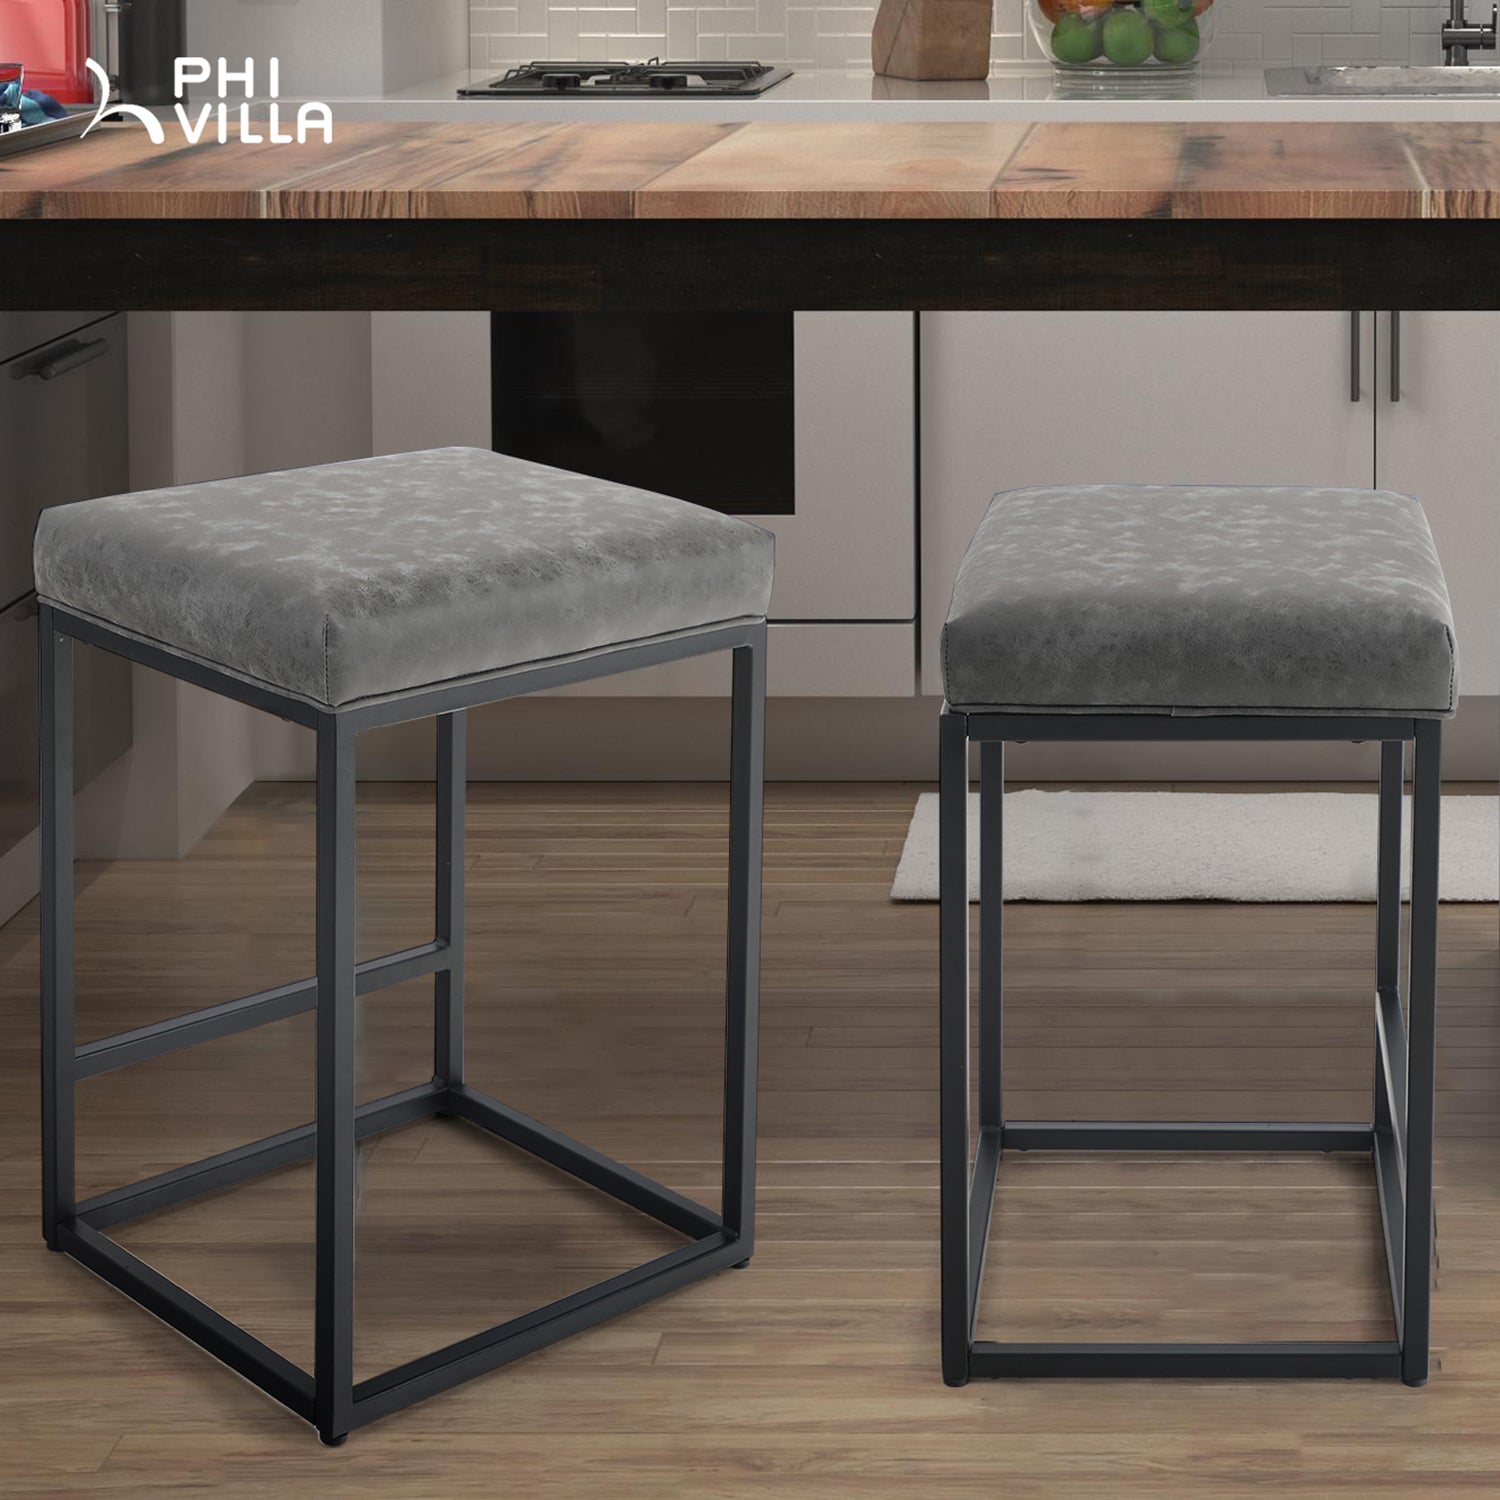 PHI VILLA 24'' Backless PU Leather Bar Stools for Kitchen Island with Sturdy Metal Frame, Set of 2